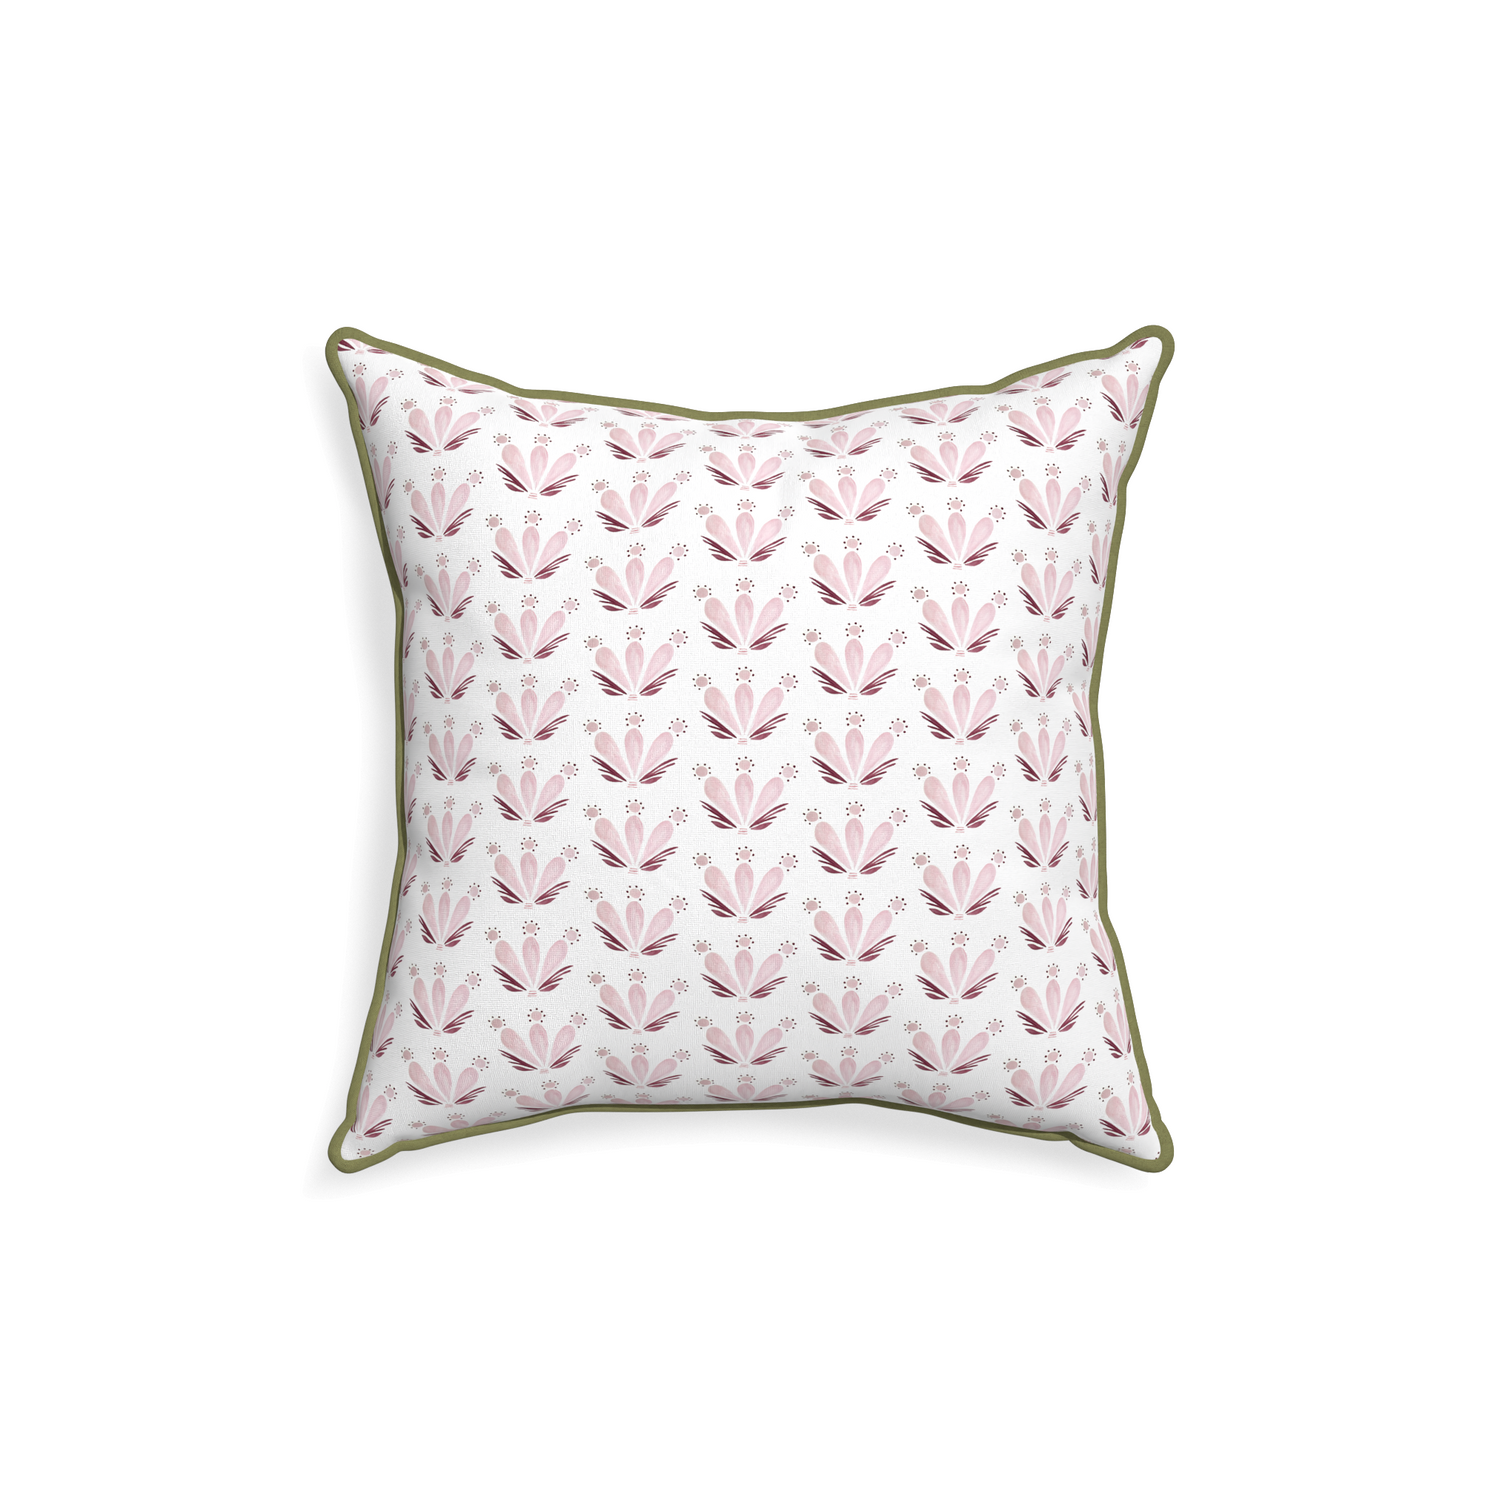 18-square serena pink custom pillow with moss piping on white background